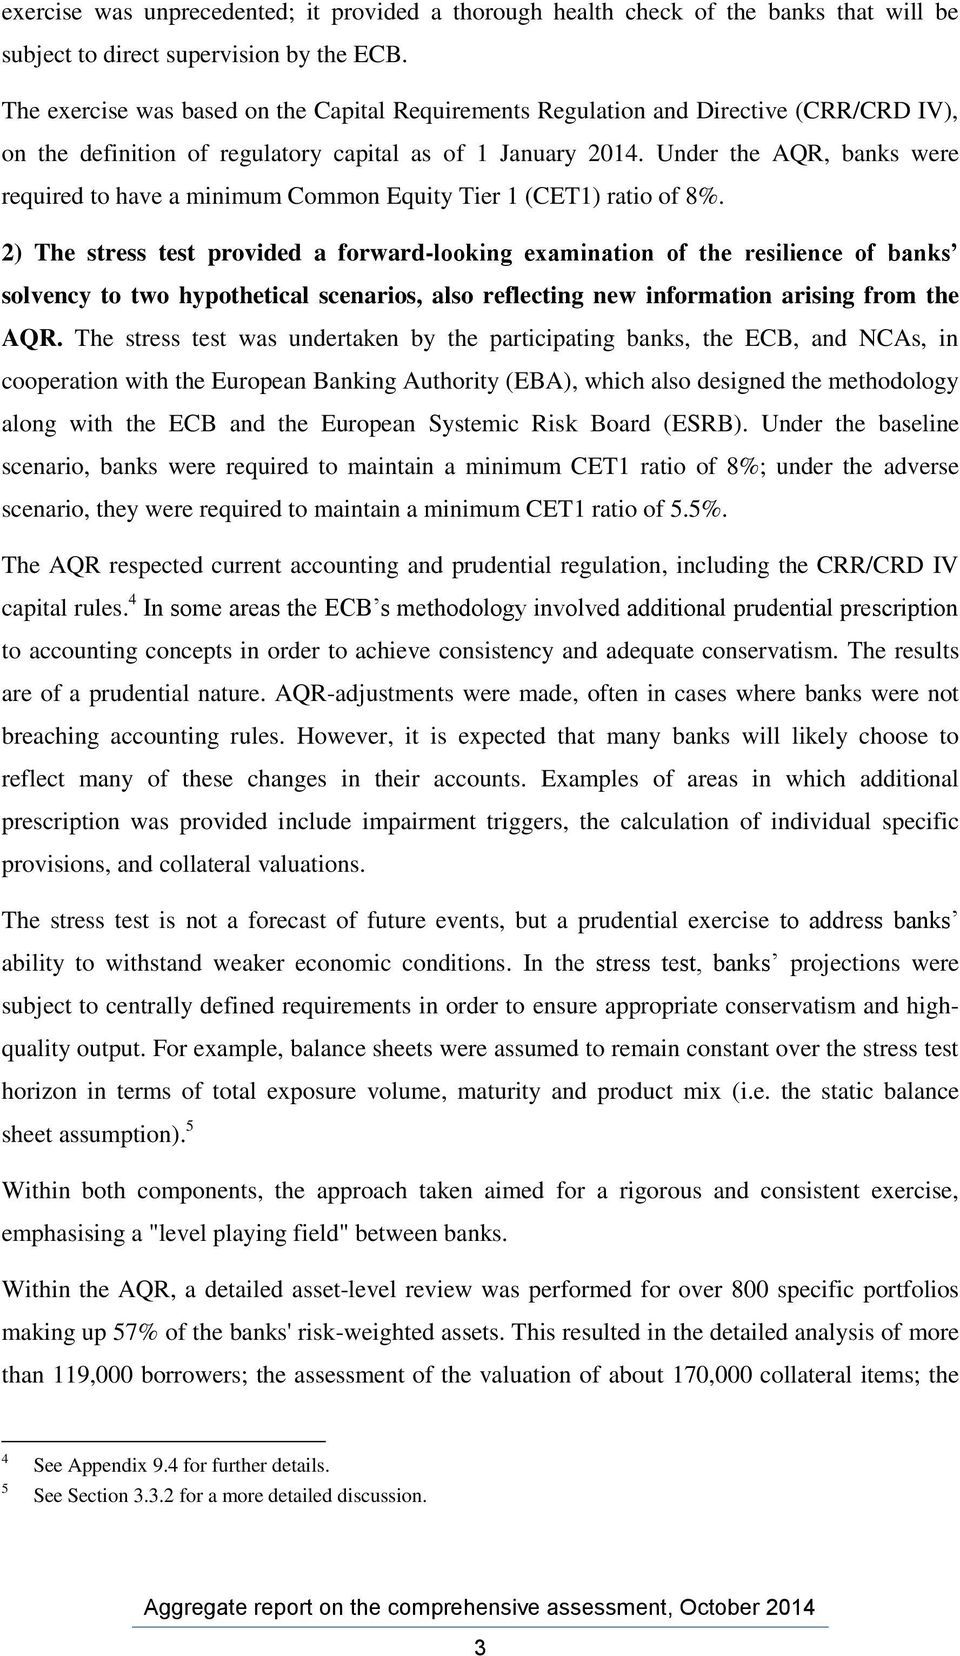 Under the AQR, banks were required to have a minimum Common Equity Tier 1 (CET1) ratio of 8%.